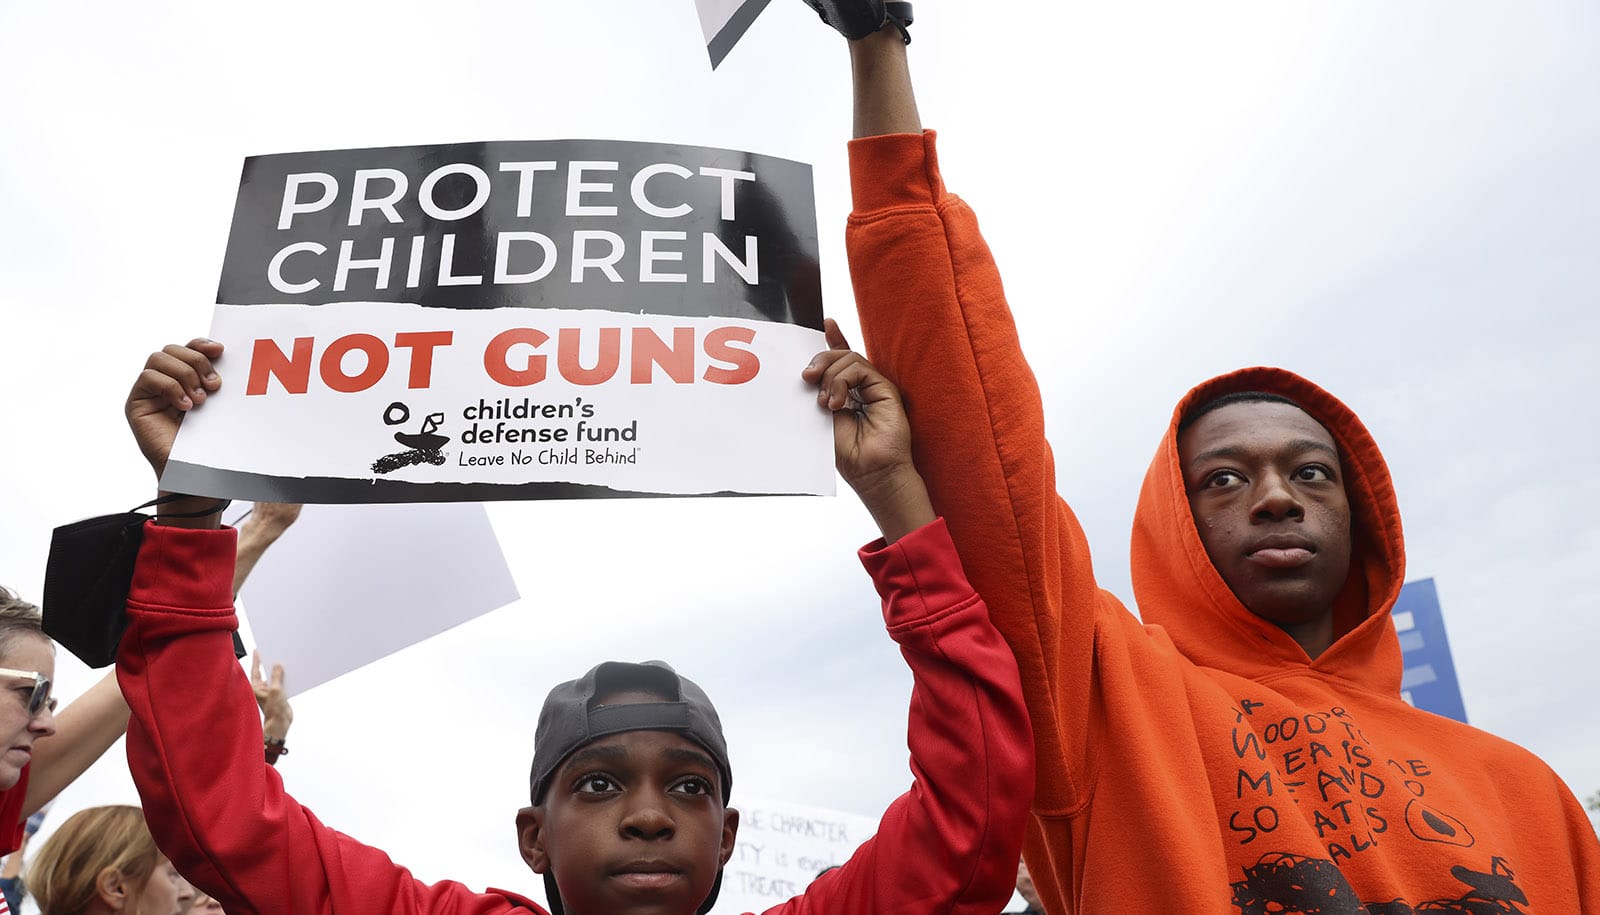 two serious young men hold protest sign -- "Protect children not guns"